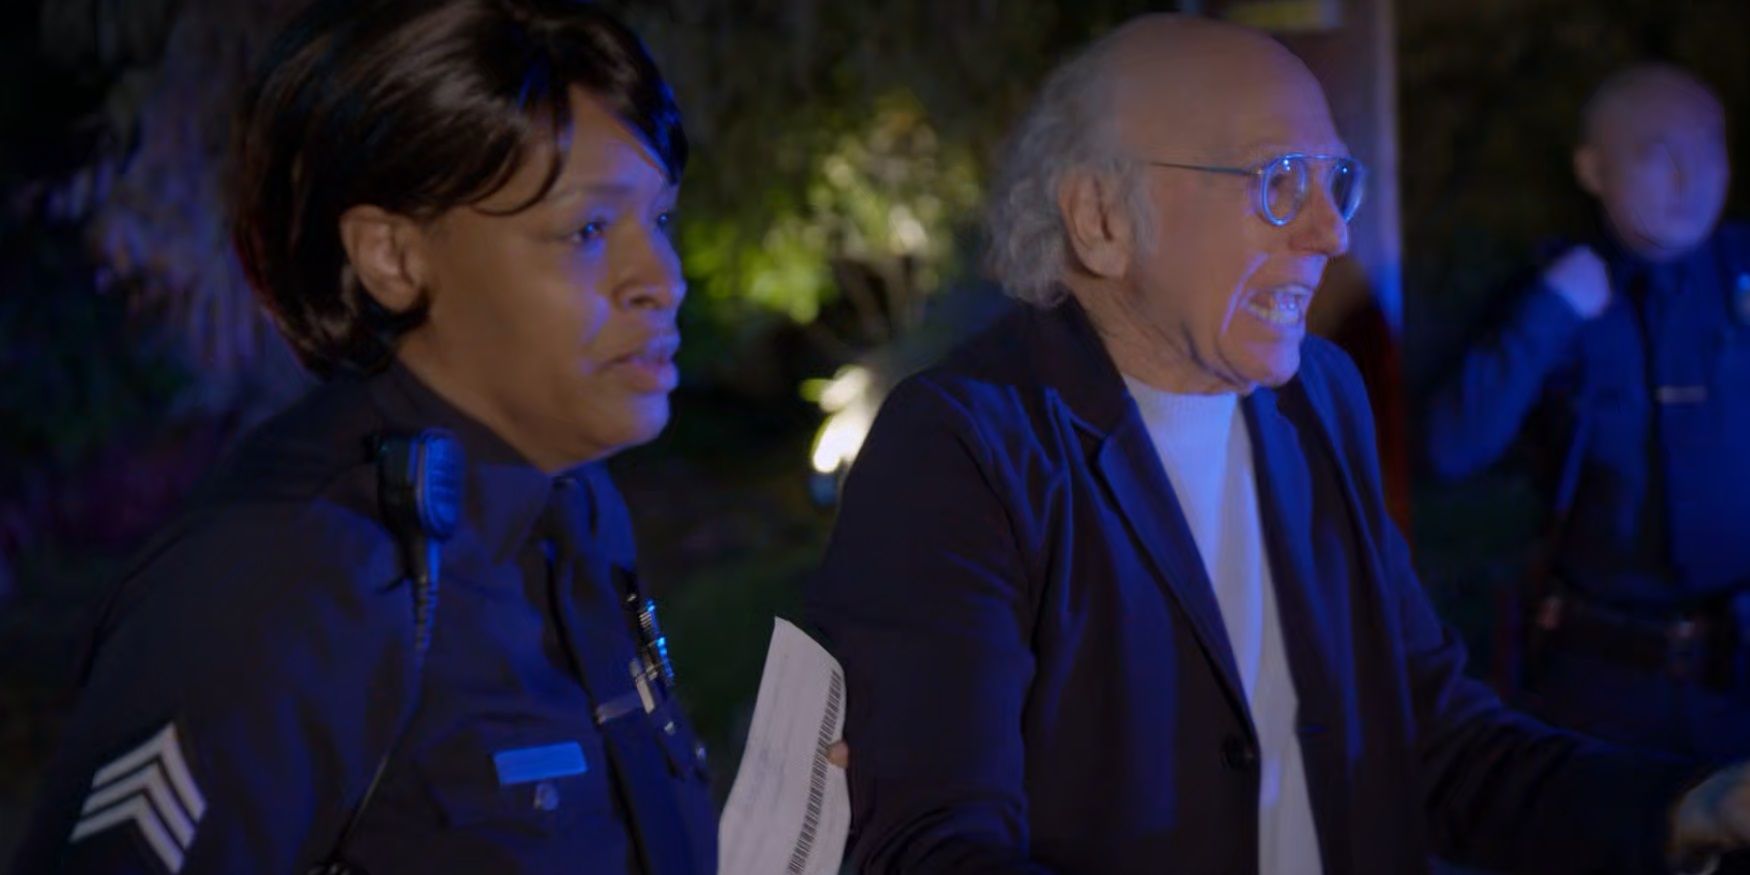 Larry is arrested in Curb Your Enthusiasm